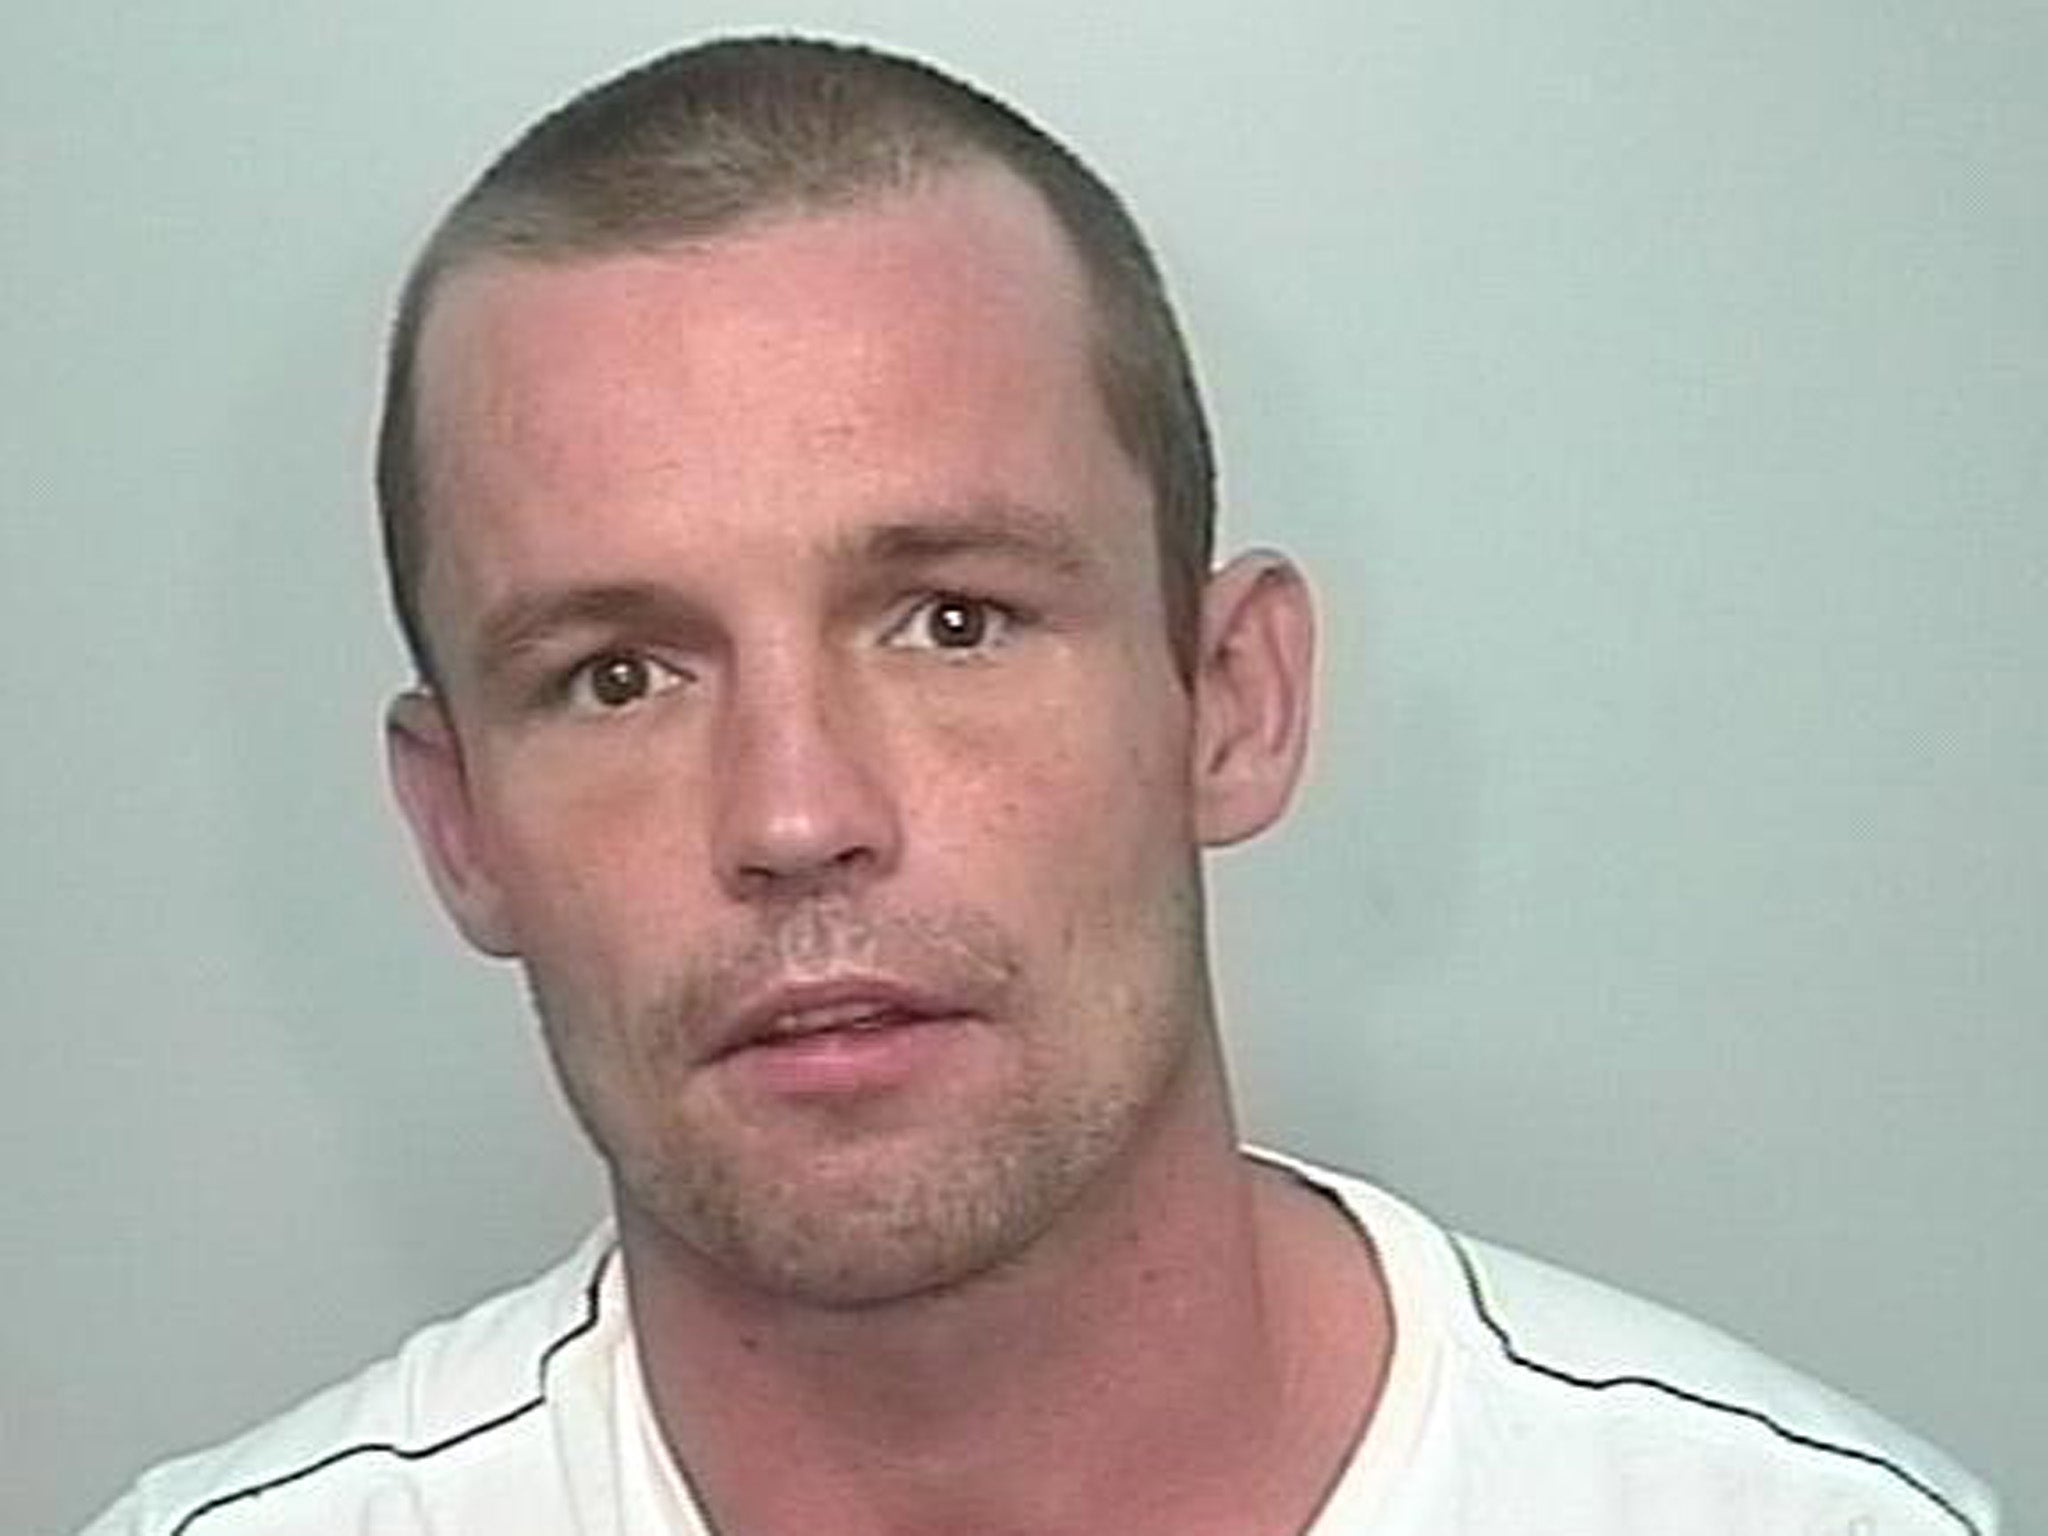 James Leslie, 37, has been arrested in connection with the shooting of a police officer in Leeds